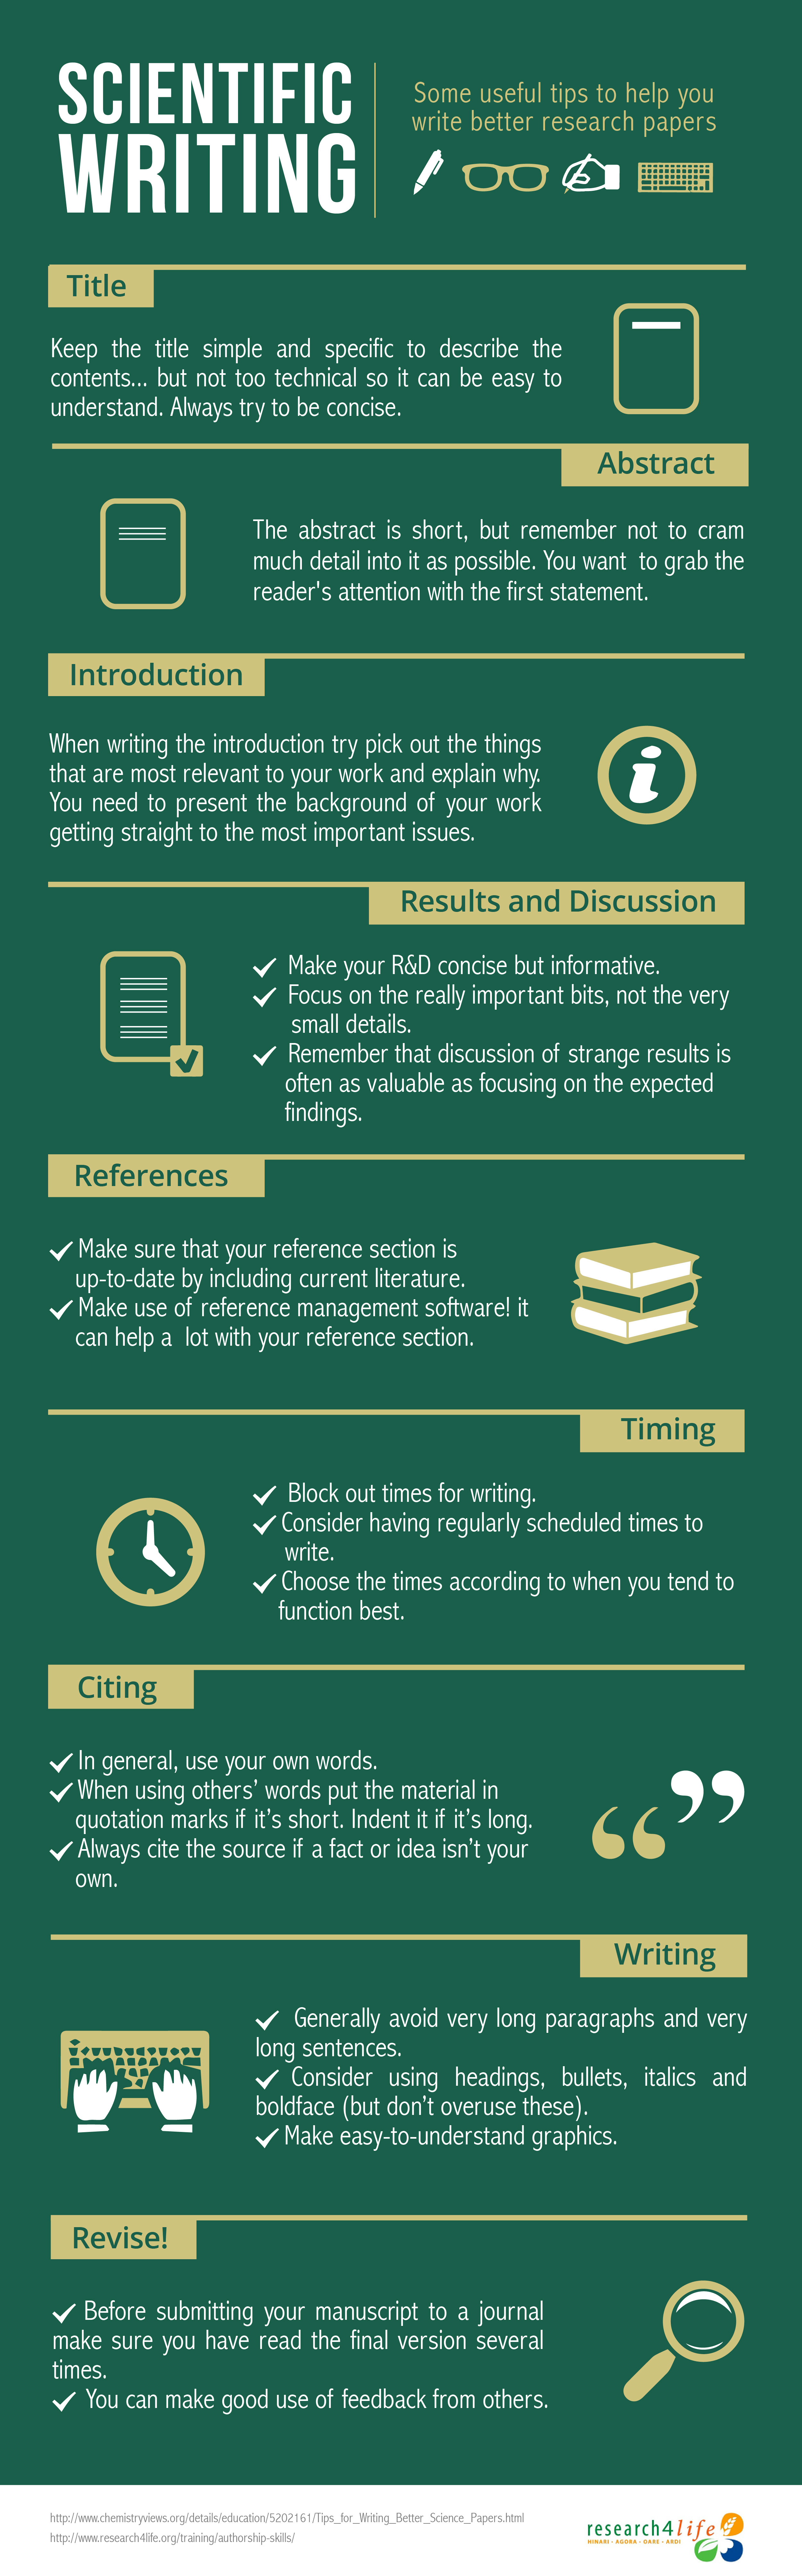 try this research methods for writers